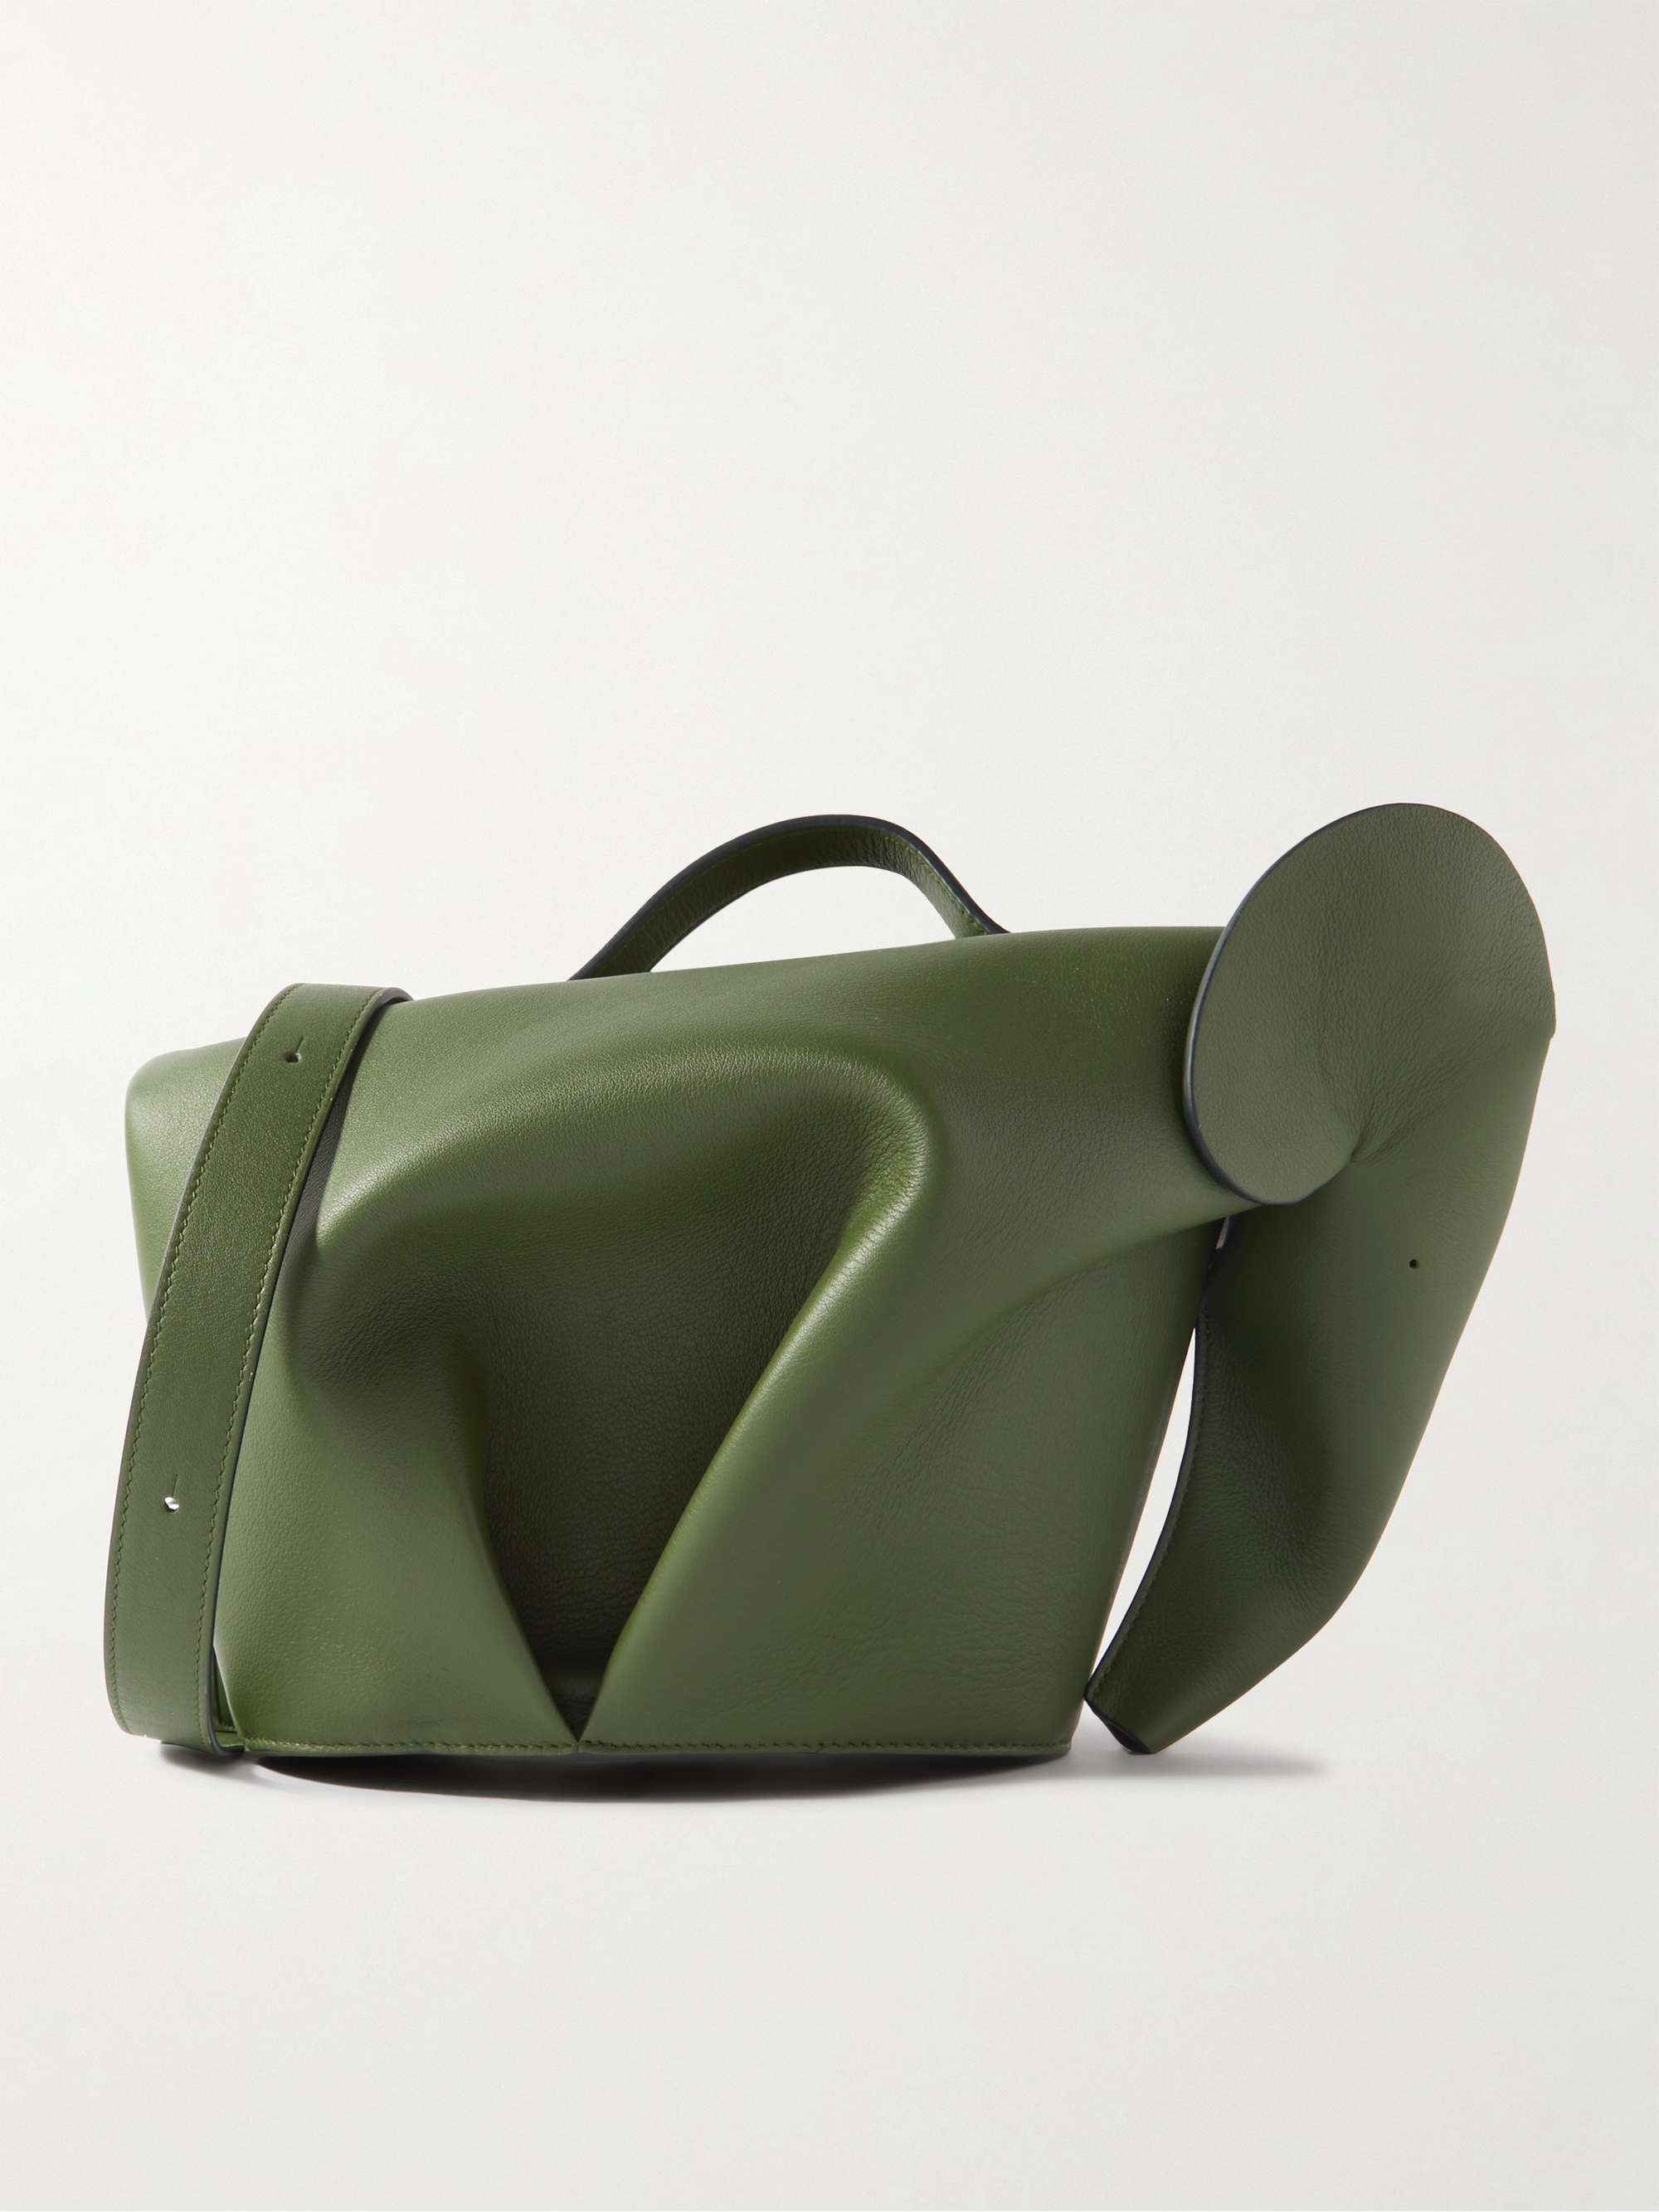 Loewe Has A Leather Cut-Out Tote That's Quite A Beauty - BAGAHOLICBOY